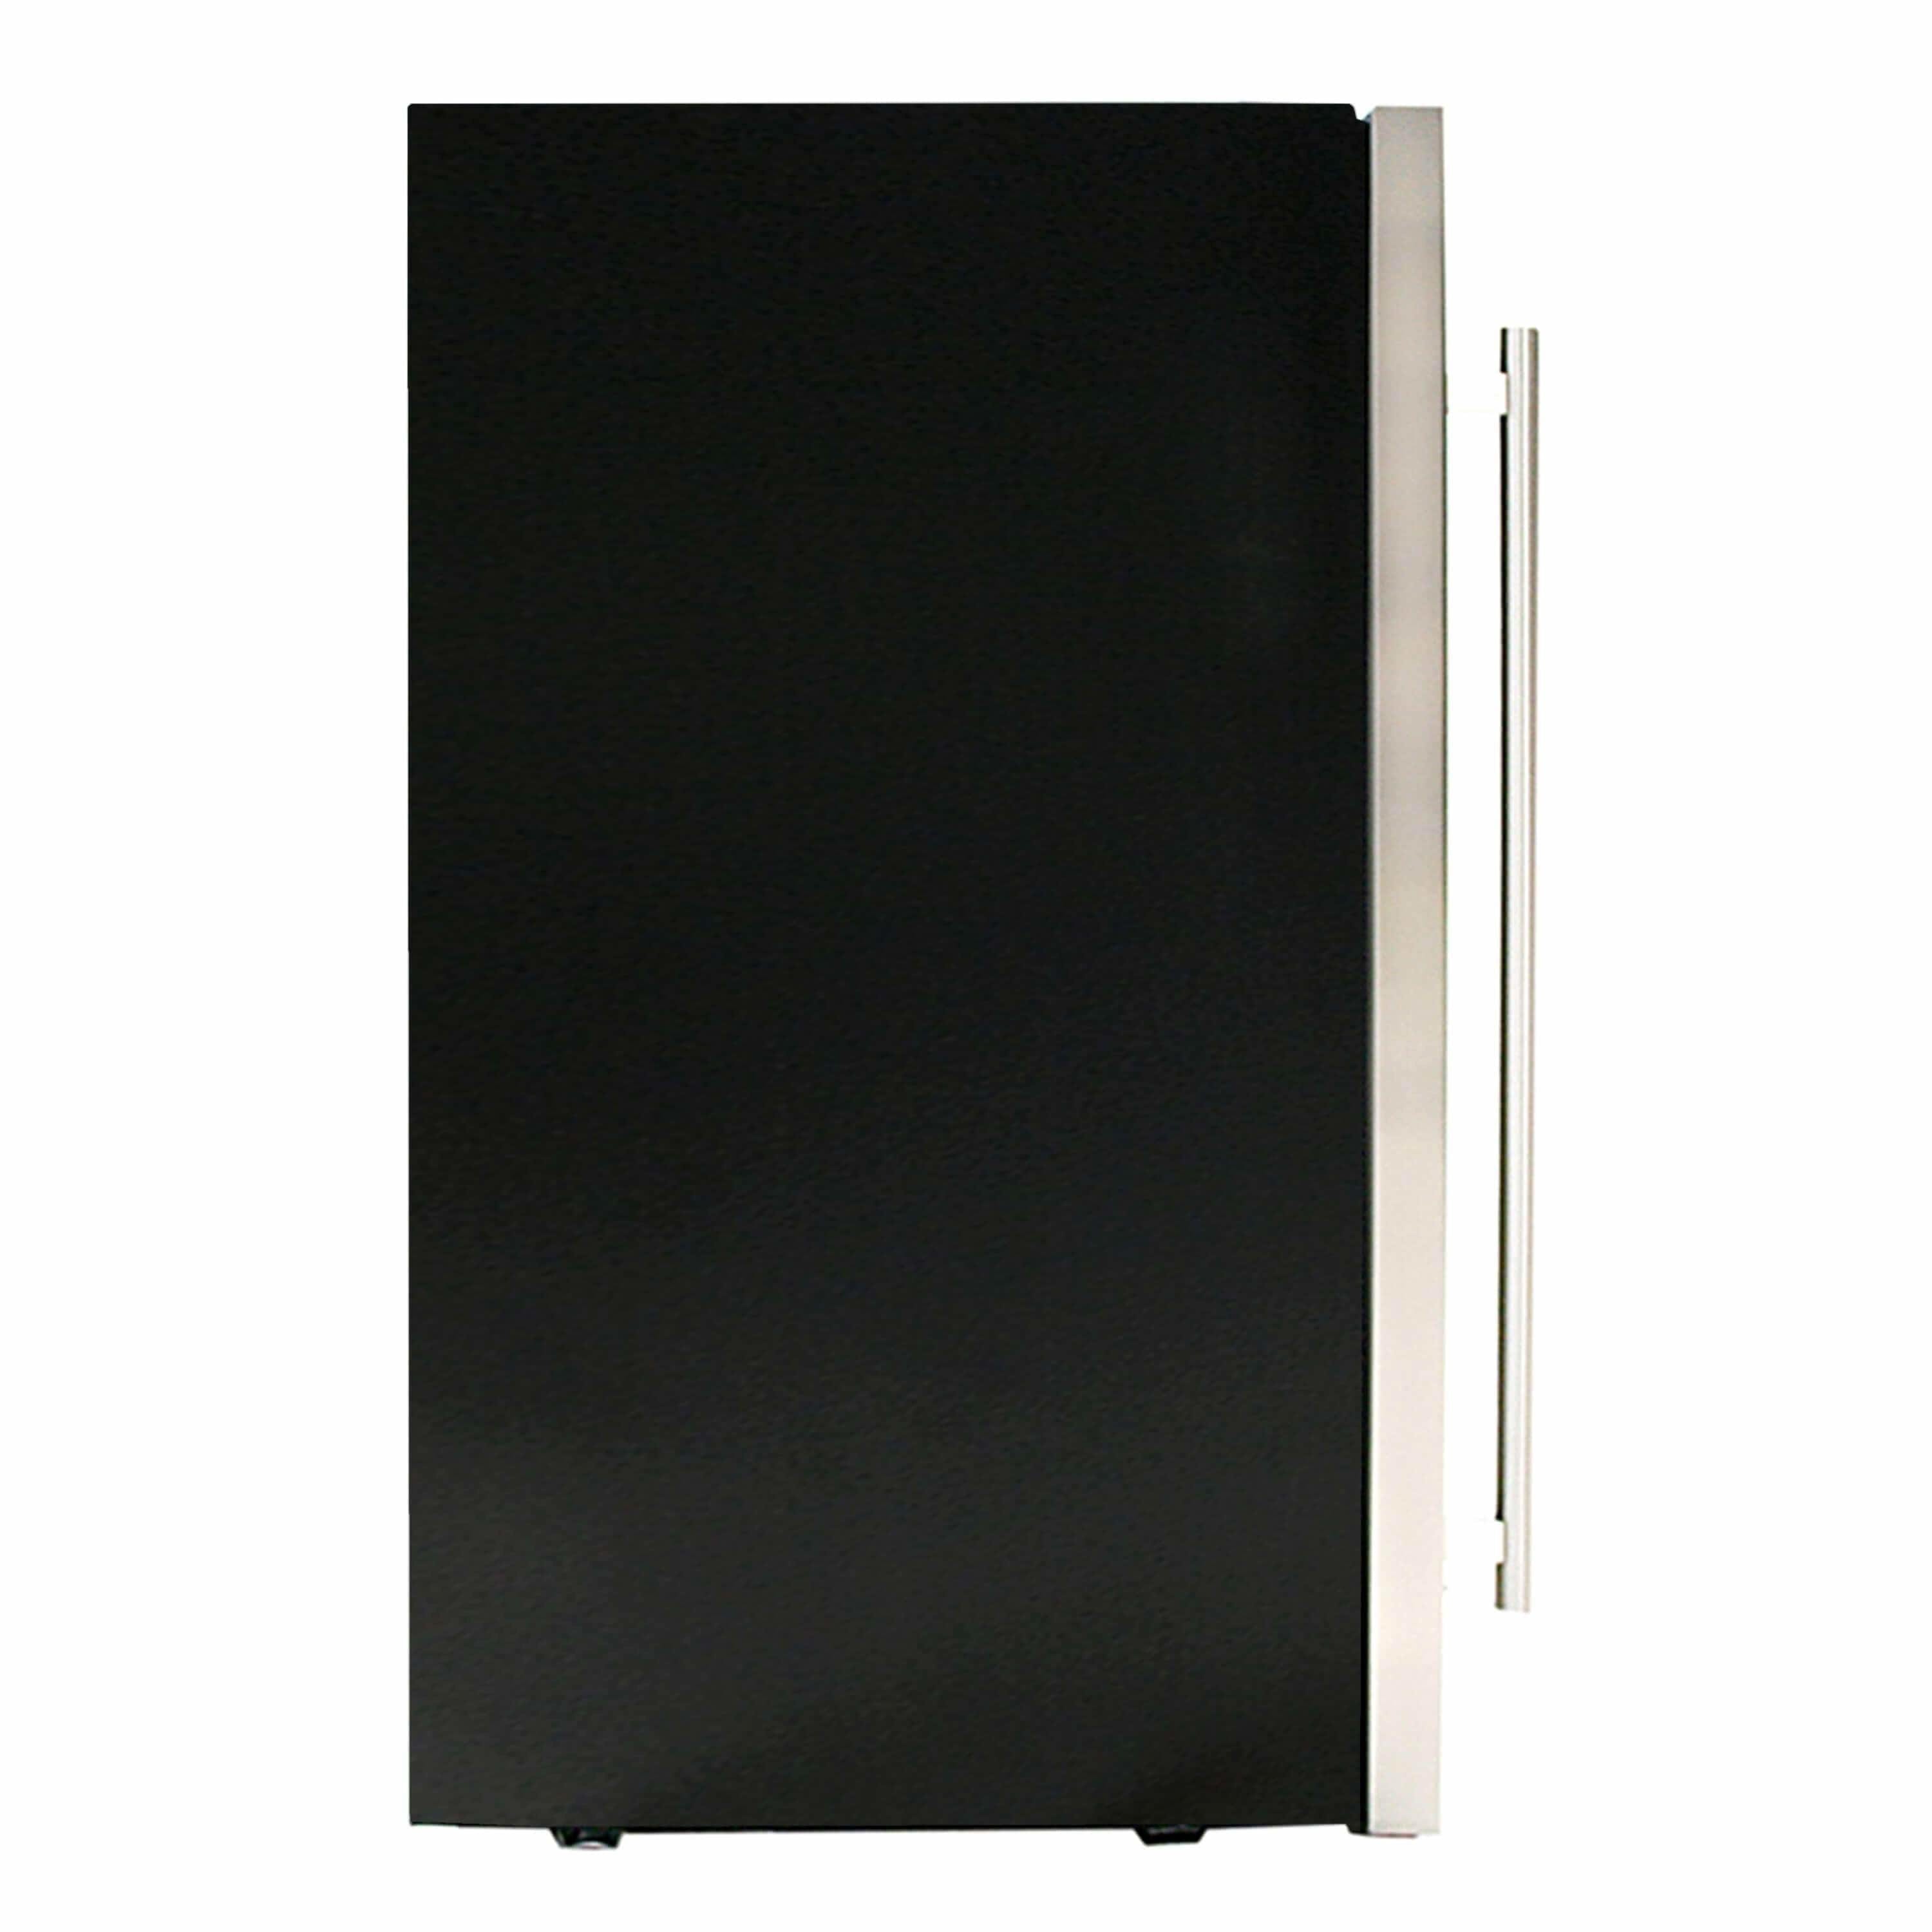 Whynter Beverage Refrigerator - Stainless Steel with internal fan BR-130SB Wine Coolers Empire